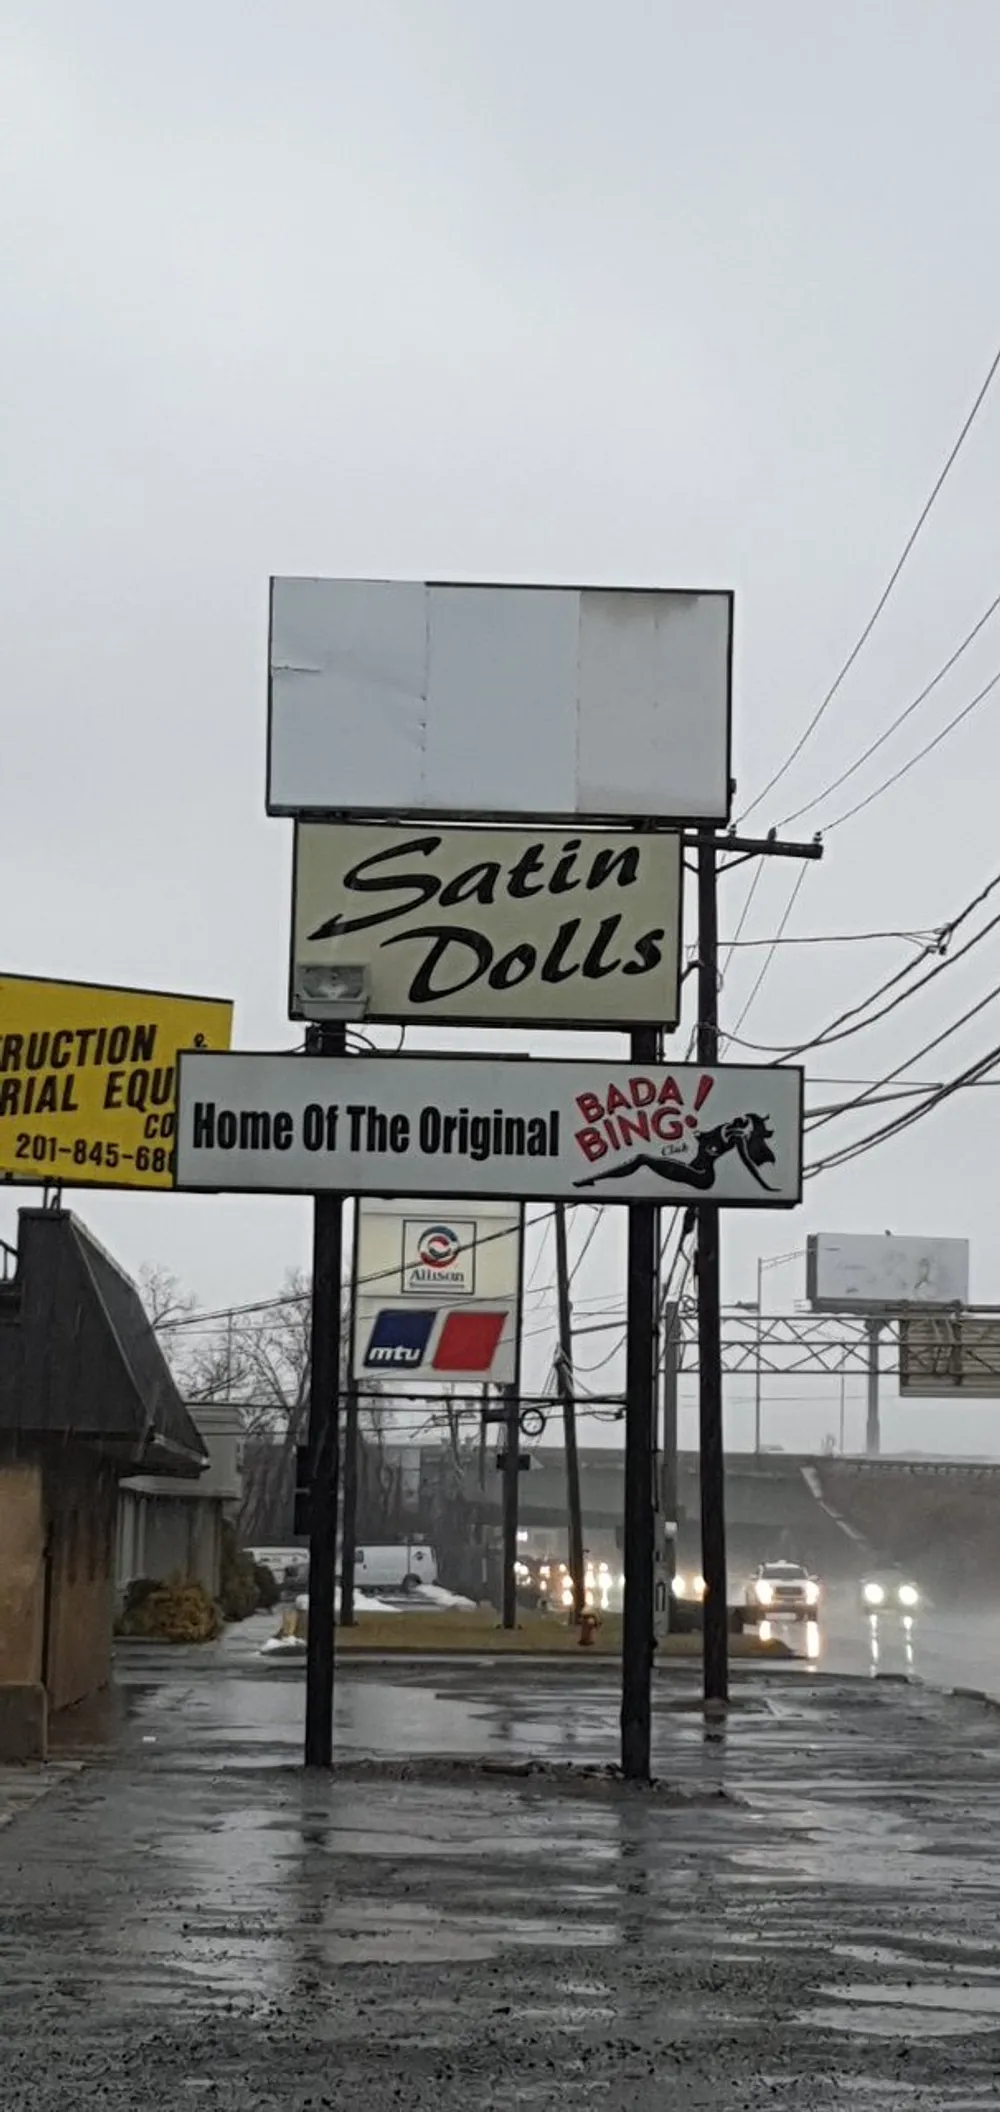 The image shows a vertical roadside sign for Satin Dolls advertised as the Home Of The Original BADA BING on a rainy day with street reflections and headlights from approaching traffic